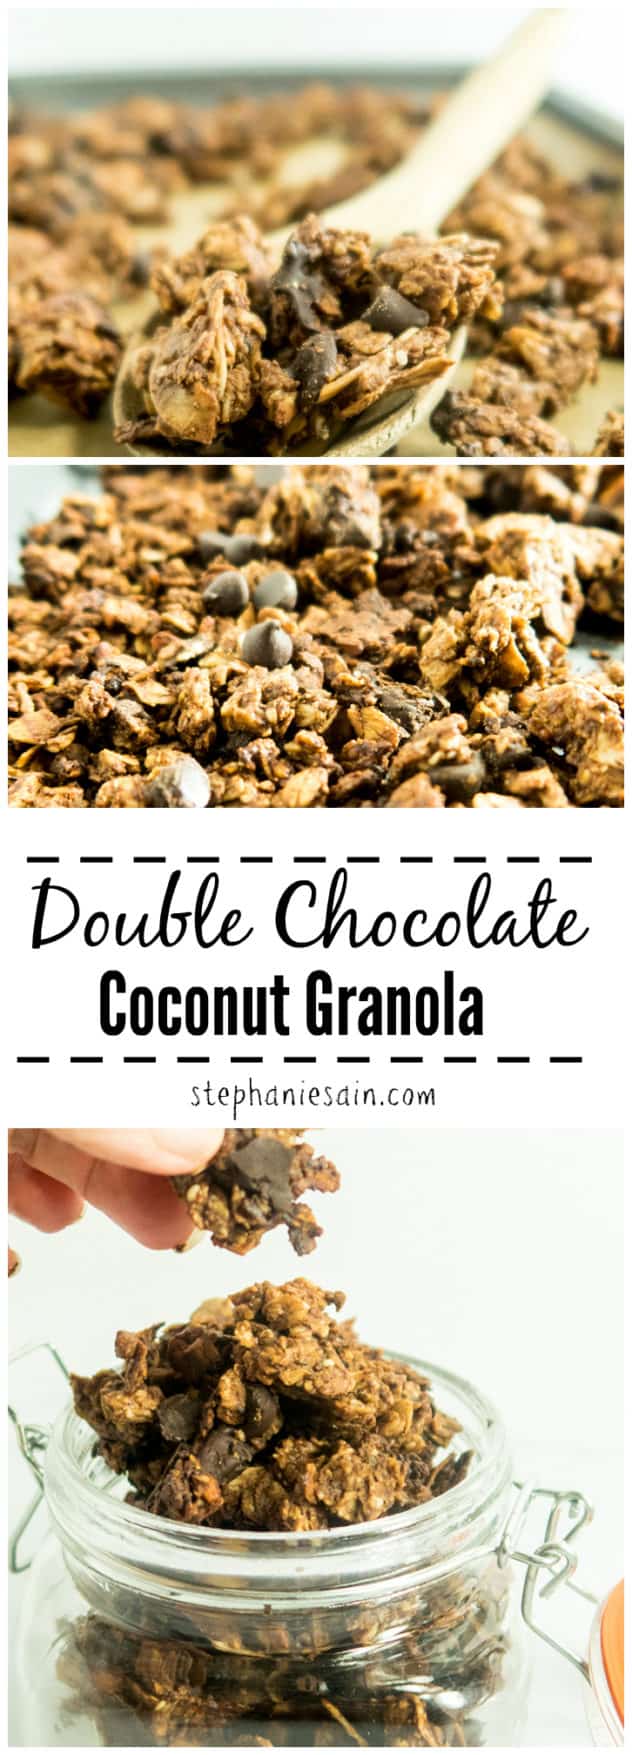 Double Chocolate Coconut Granola is loaded with intense chocolatey flavors and coconut flakes. Great as a healthy tasty snack or breakfast and it also a good topping for yogurt or smoothies. Gluten Free with Vegan Option.